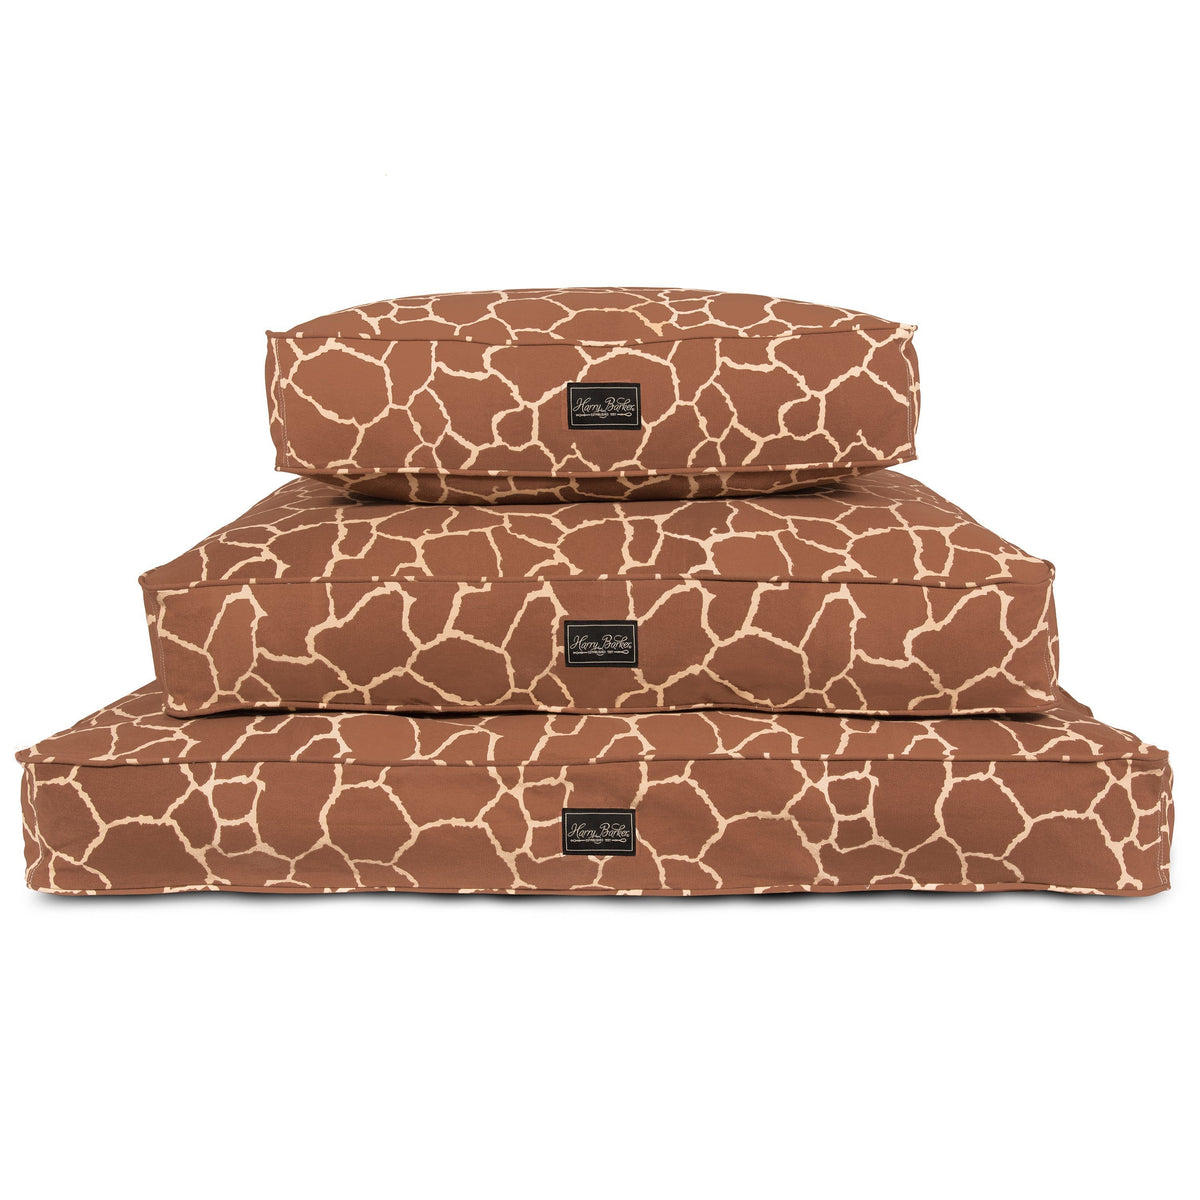 Bed Cover - Giraffe Cotton Canvas Dog Bed Cover